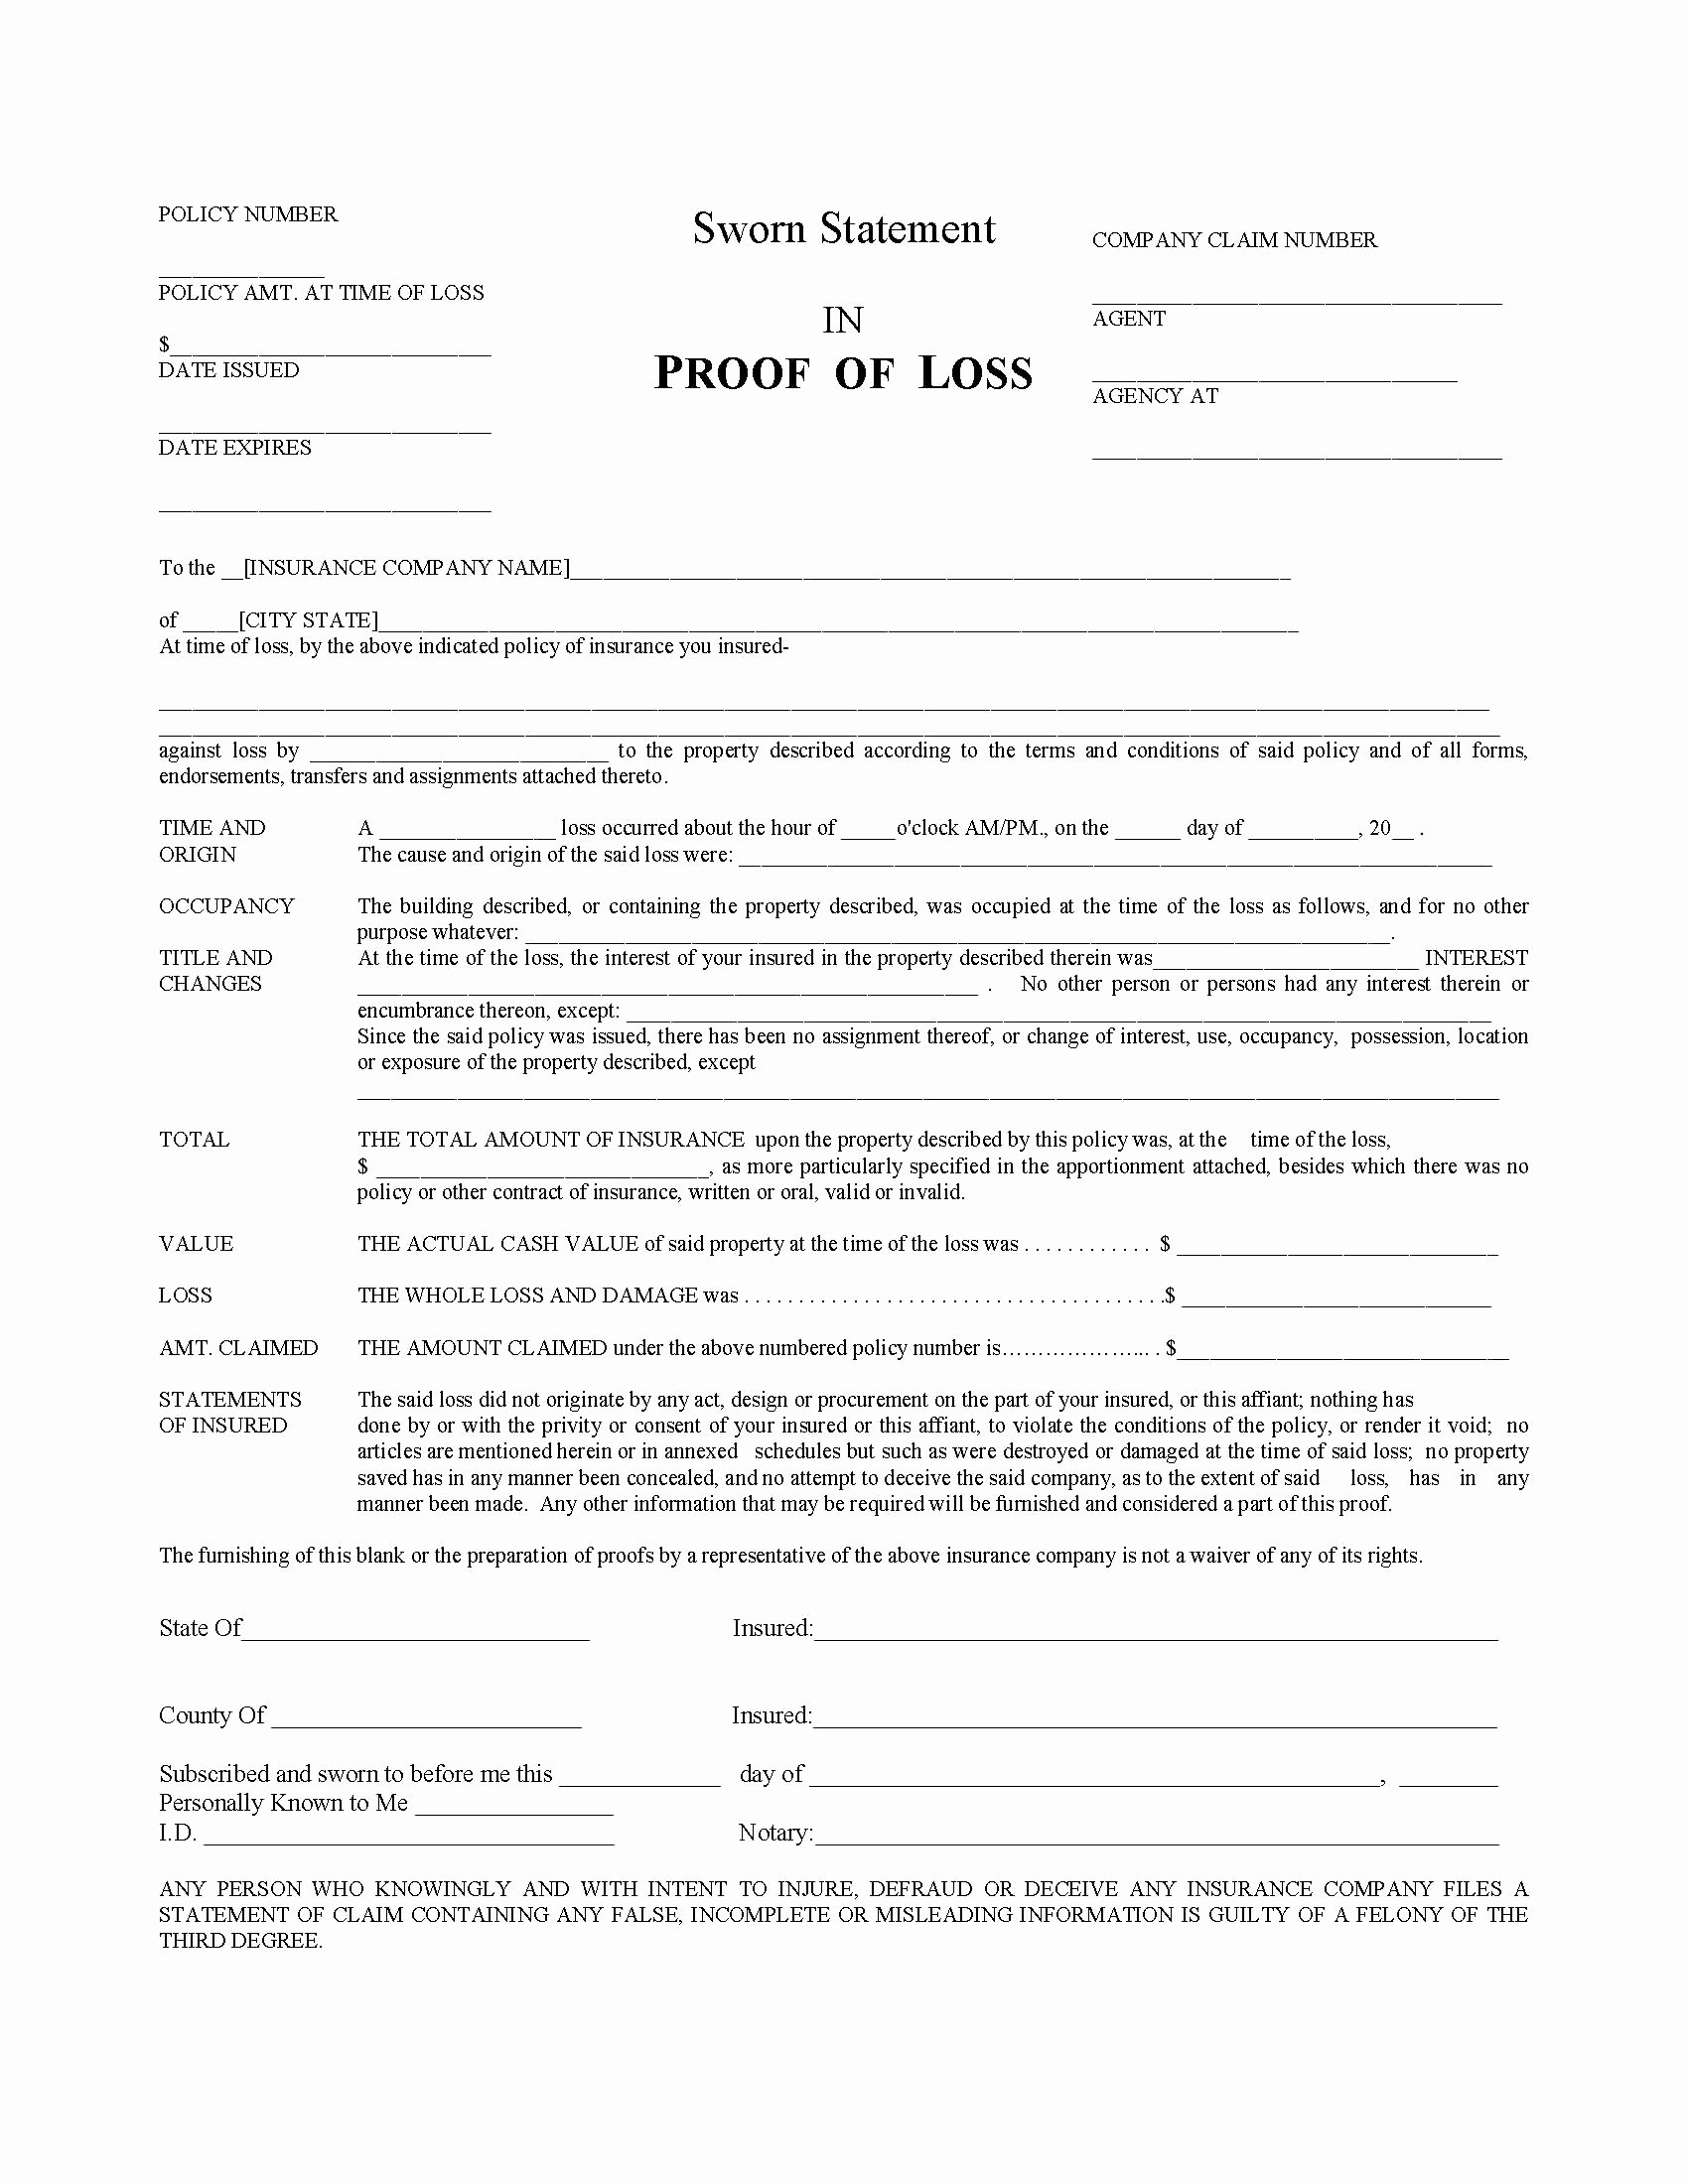 Certificate Of Insurance Request form Template Best Of Proof Loss Coverage Letter Template Samples